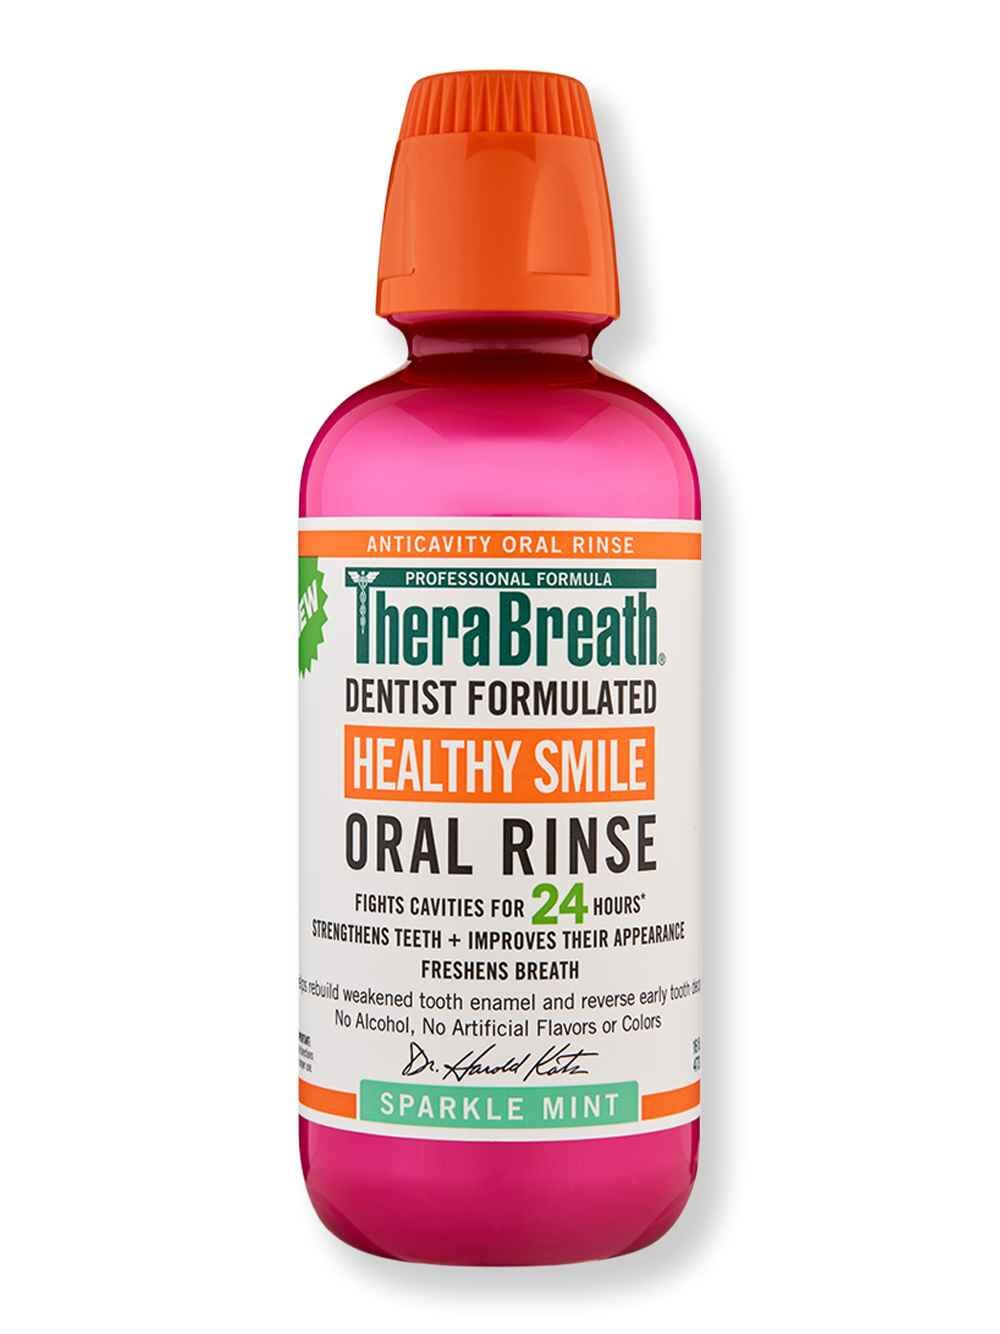 TheraBreath TheraBreath Healthy Smile Oral Rinse 16 oz Mouthwashes & Toothpastes 